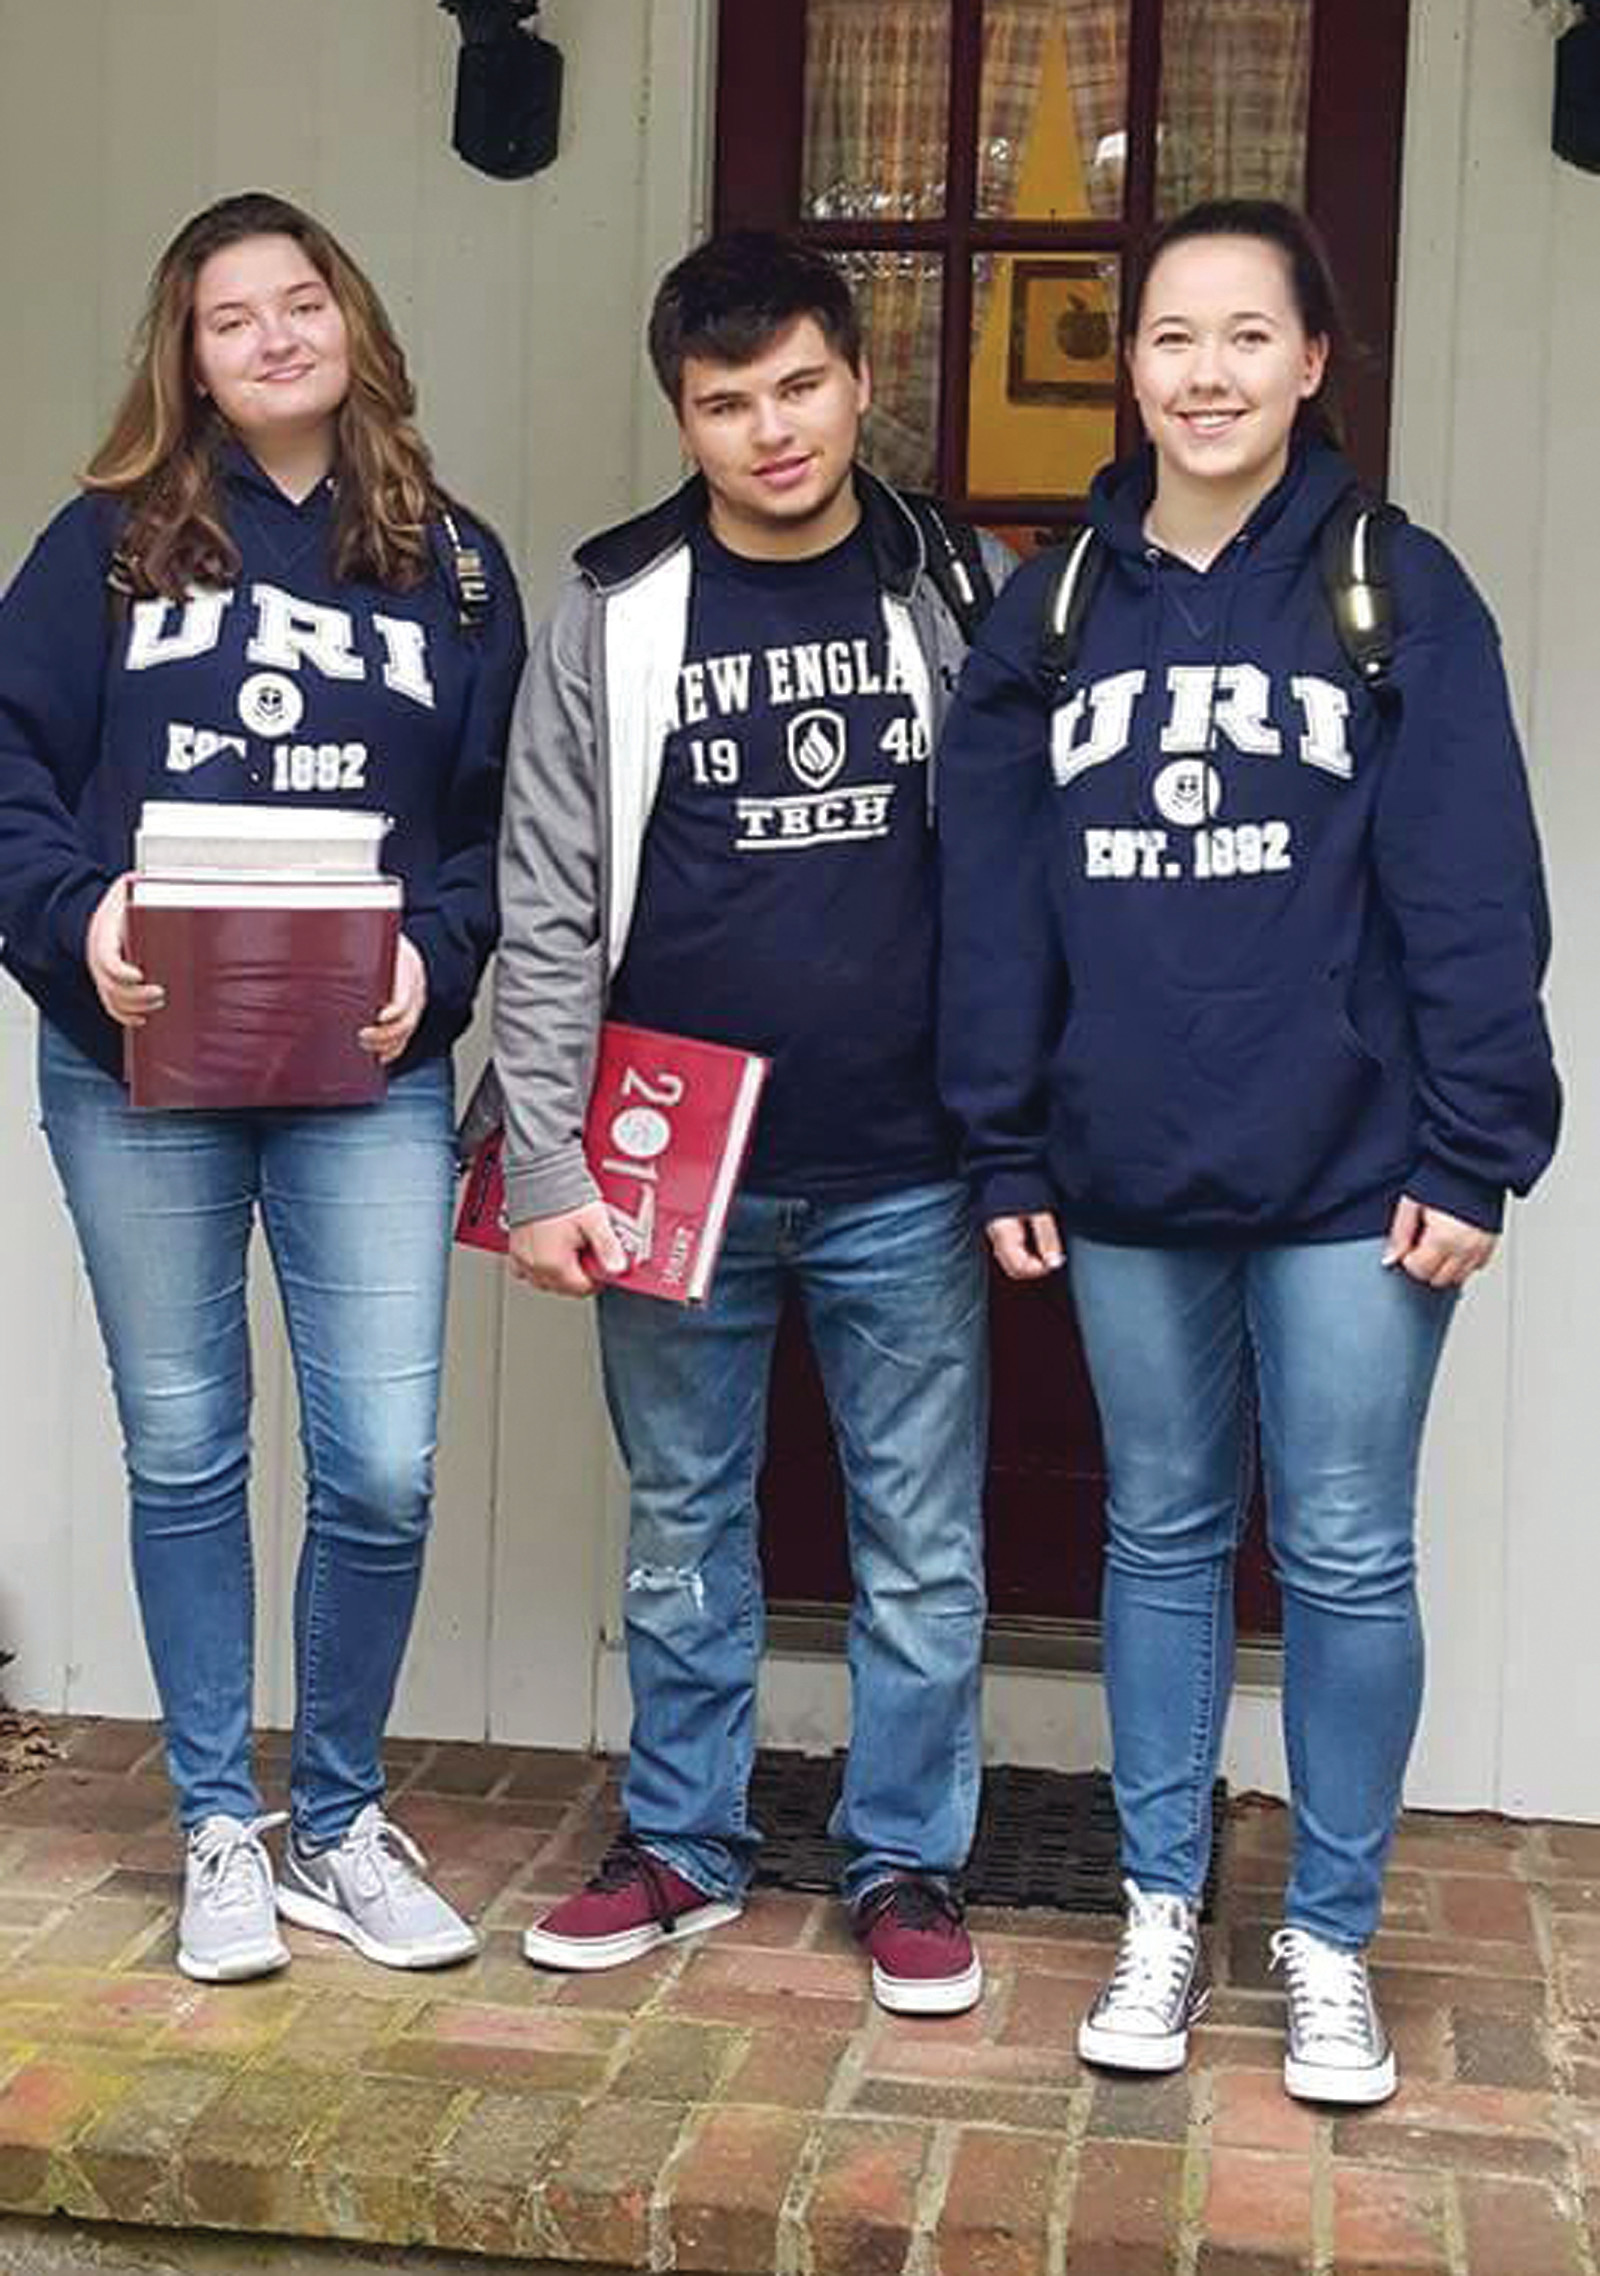 SCHOOL SHIRT DAY AT CHSW: During the final week of school at Cranston High School West, one of the many celebratory days is one on which the seniors can proudly show off the school they will be attending by wearing a shirt or sweatshirt with the school name on it. Here, Ryan, Jordan and Allison show their school spirit for New England Tech and the University of Rhode Island.